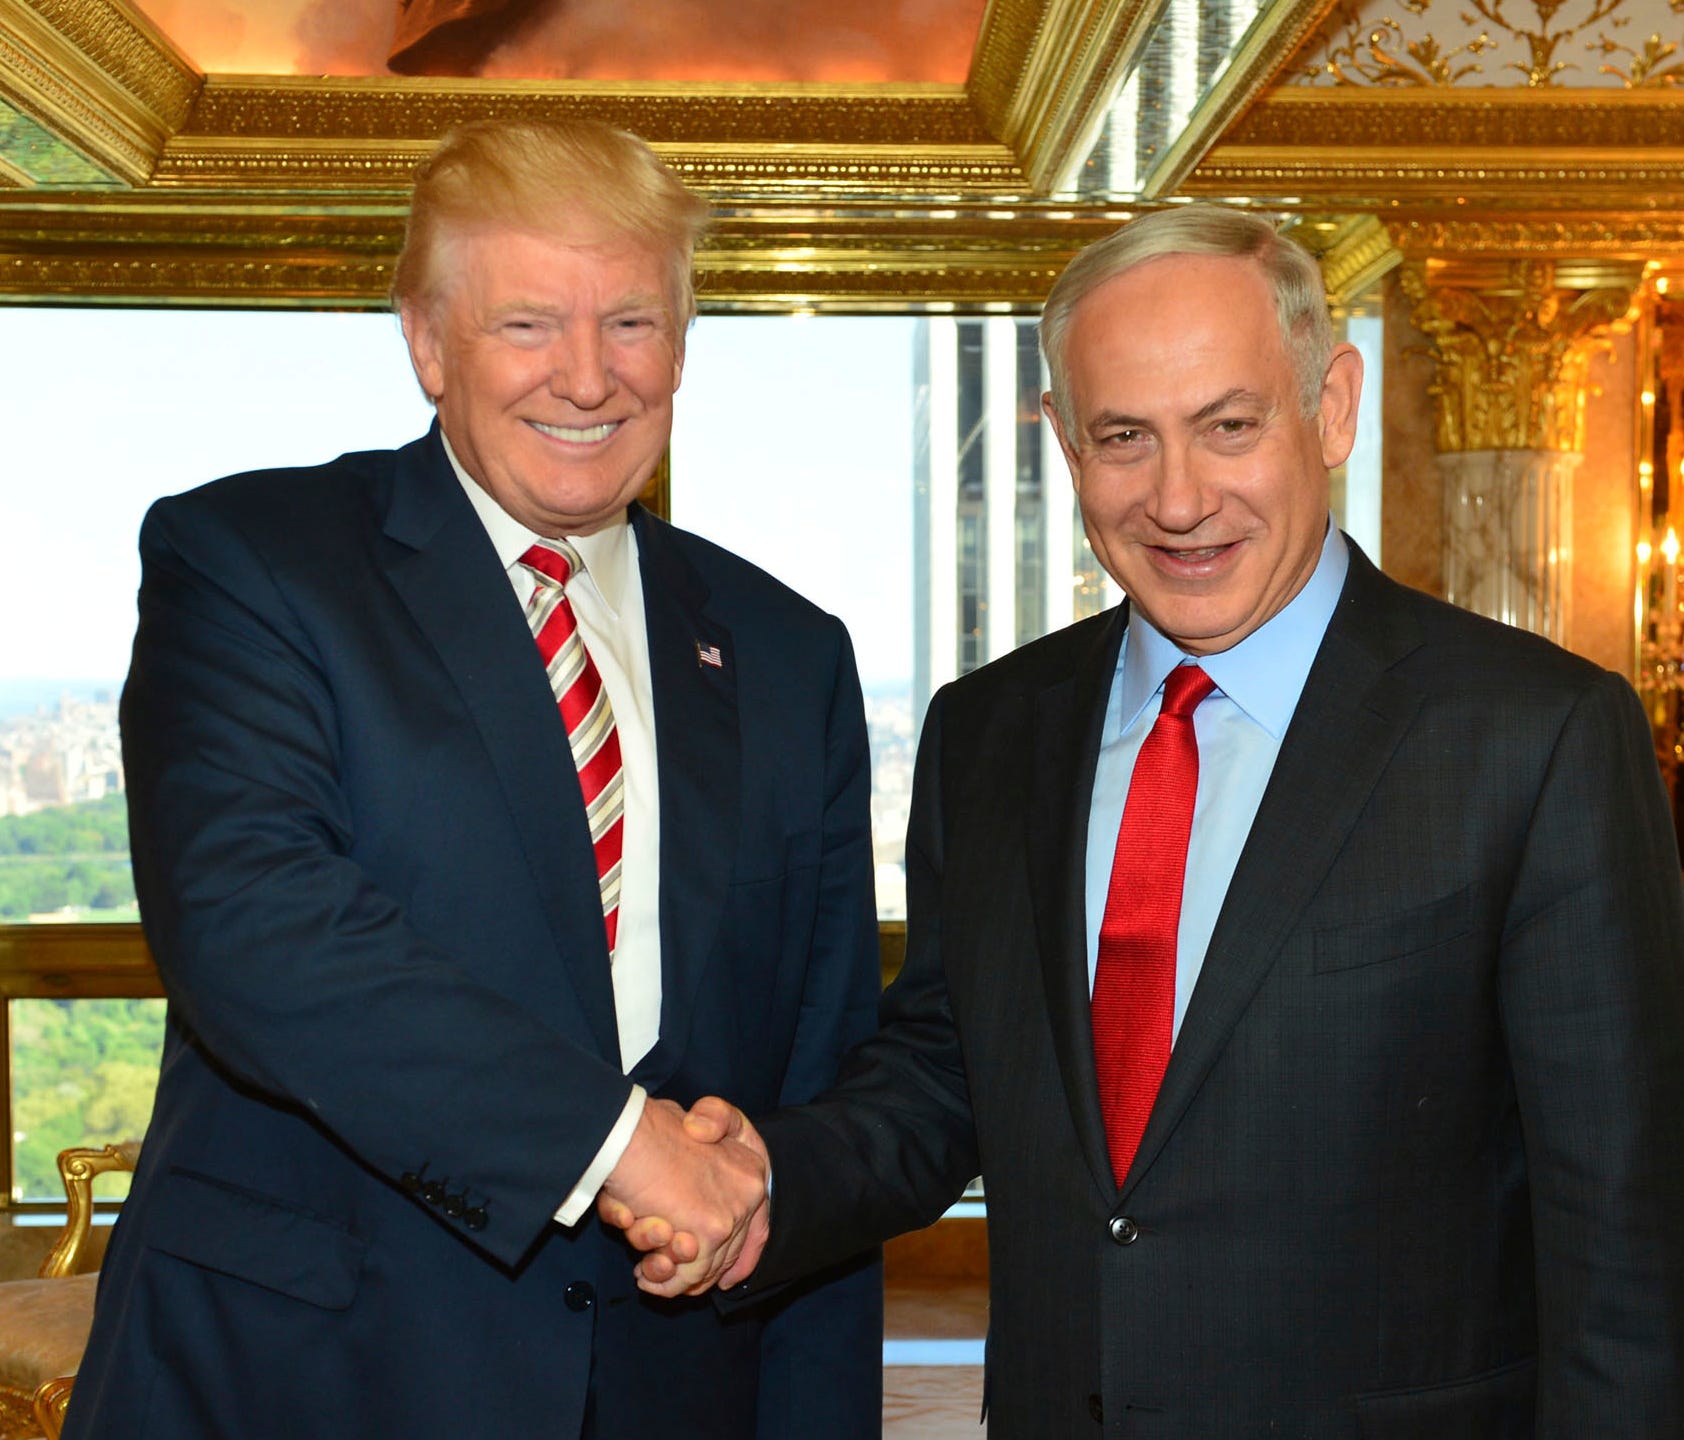 In this handout photo made on Sunday, Sept. 25, 2016, provided by the Israeli Government Press Office, Republican Presidential candidate Donald Trump shakes hand with Israeli Prime Minister Benjamin Netanyahu in New York.